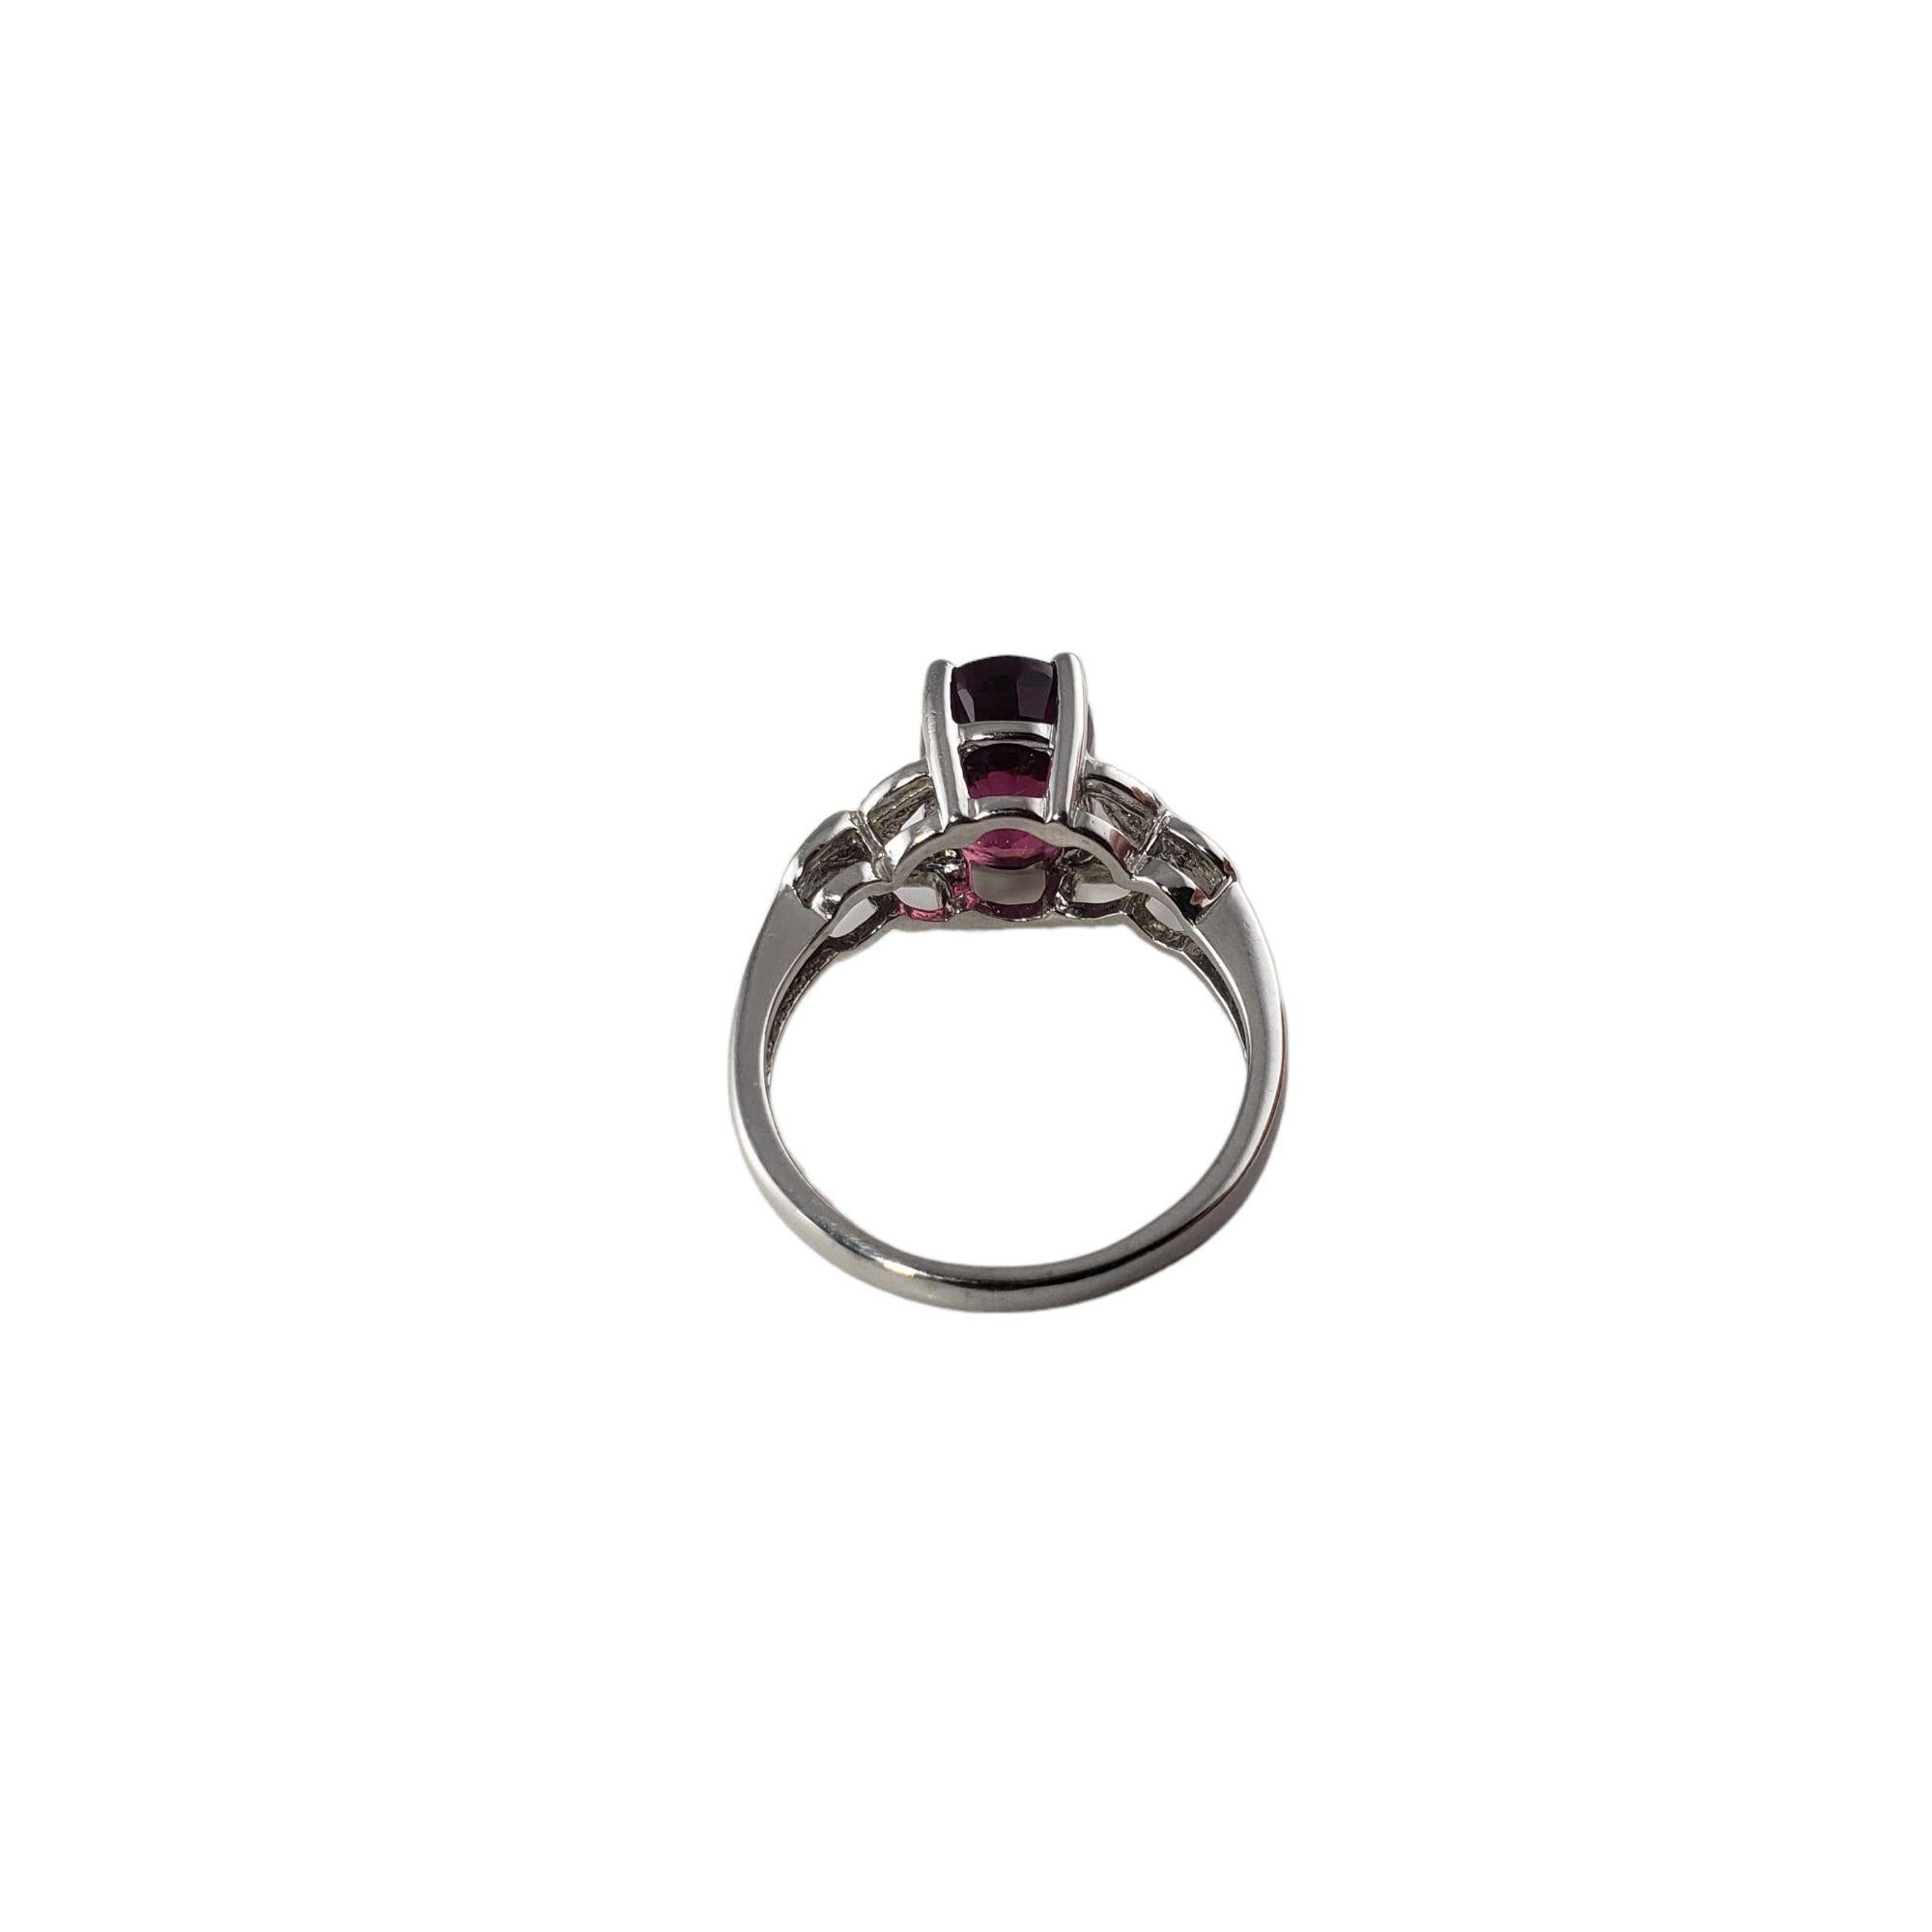 Vintage 14 Karat White Gold Pink Tourmaline and Diamond Ring Size 6.5-6.75 JAGi Certified-

This lovely ring features one oval pink tourmaline (9 mm x 7 mm) and ten round brilliant cut diamonds set in classic 14K white gold.
Shank: 2 mm.

Tourmaline